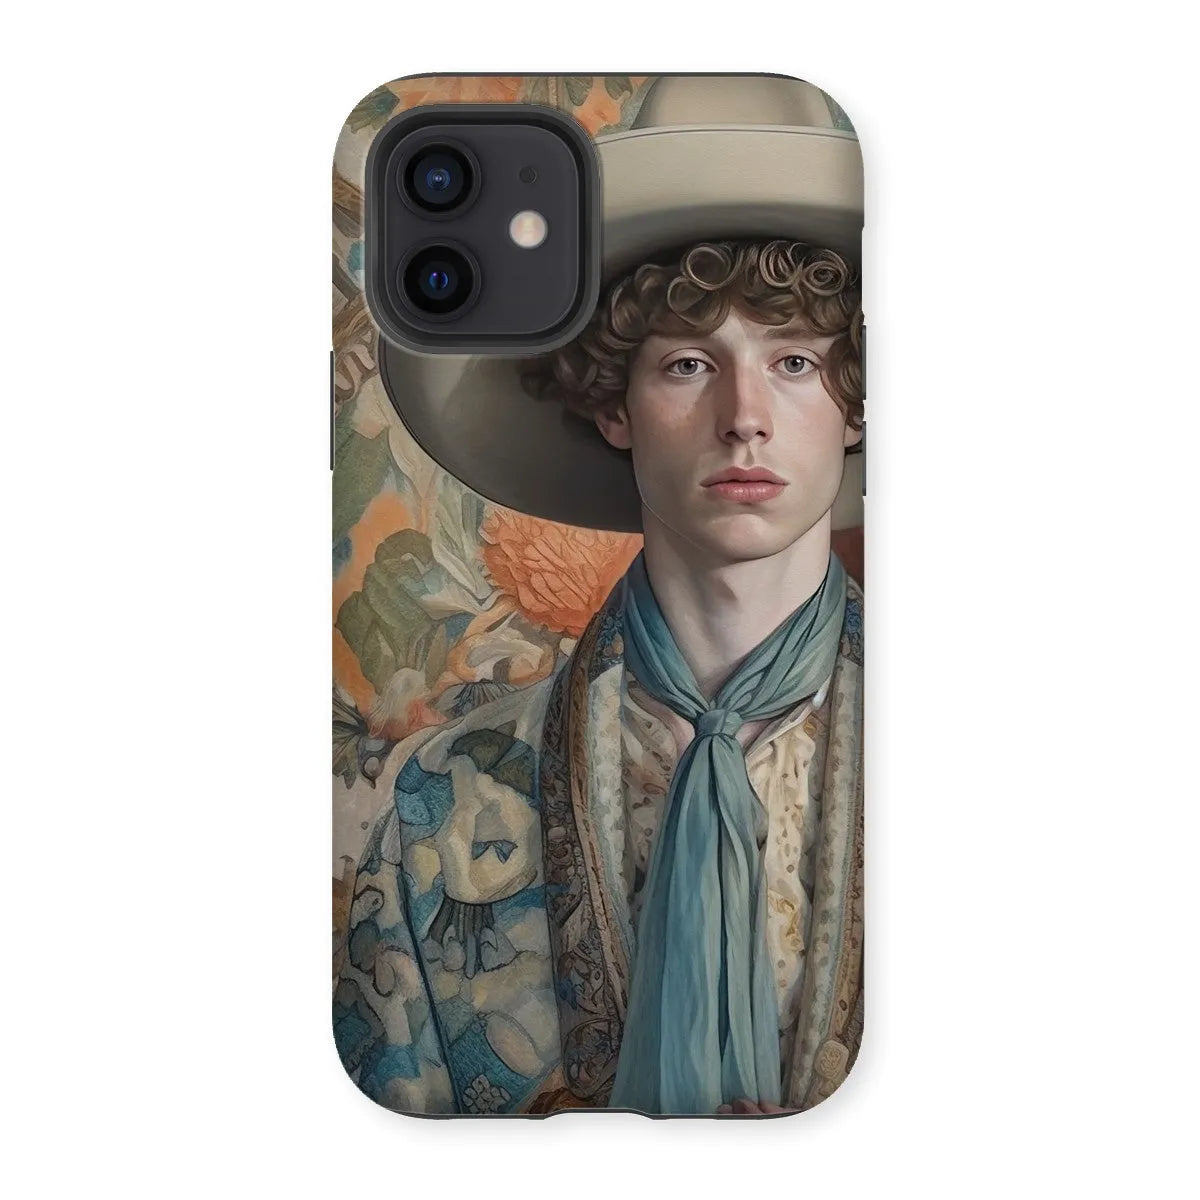 Theodore The Gay Cowboy - Dandy Gay Men Art Phone Case - Iphone 12 / Matte - Mobile Phone Cases - Aesthetic Art